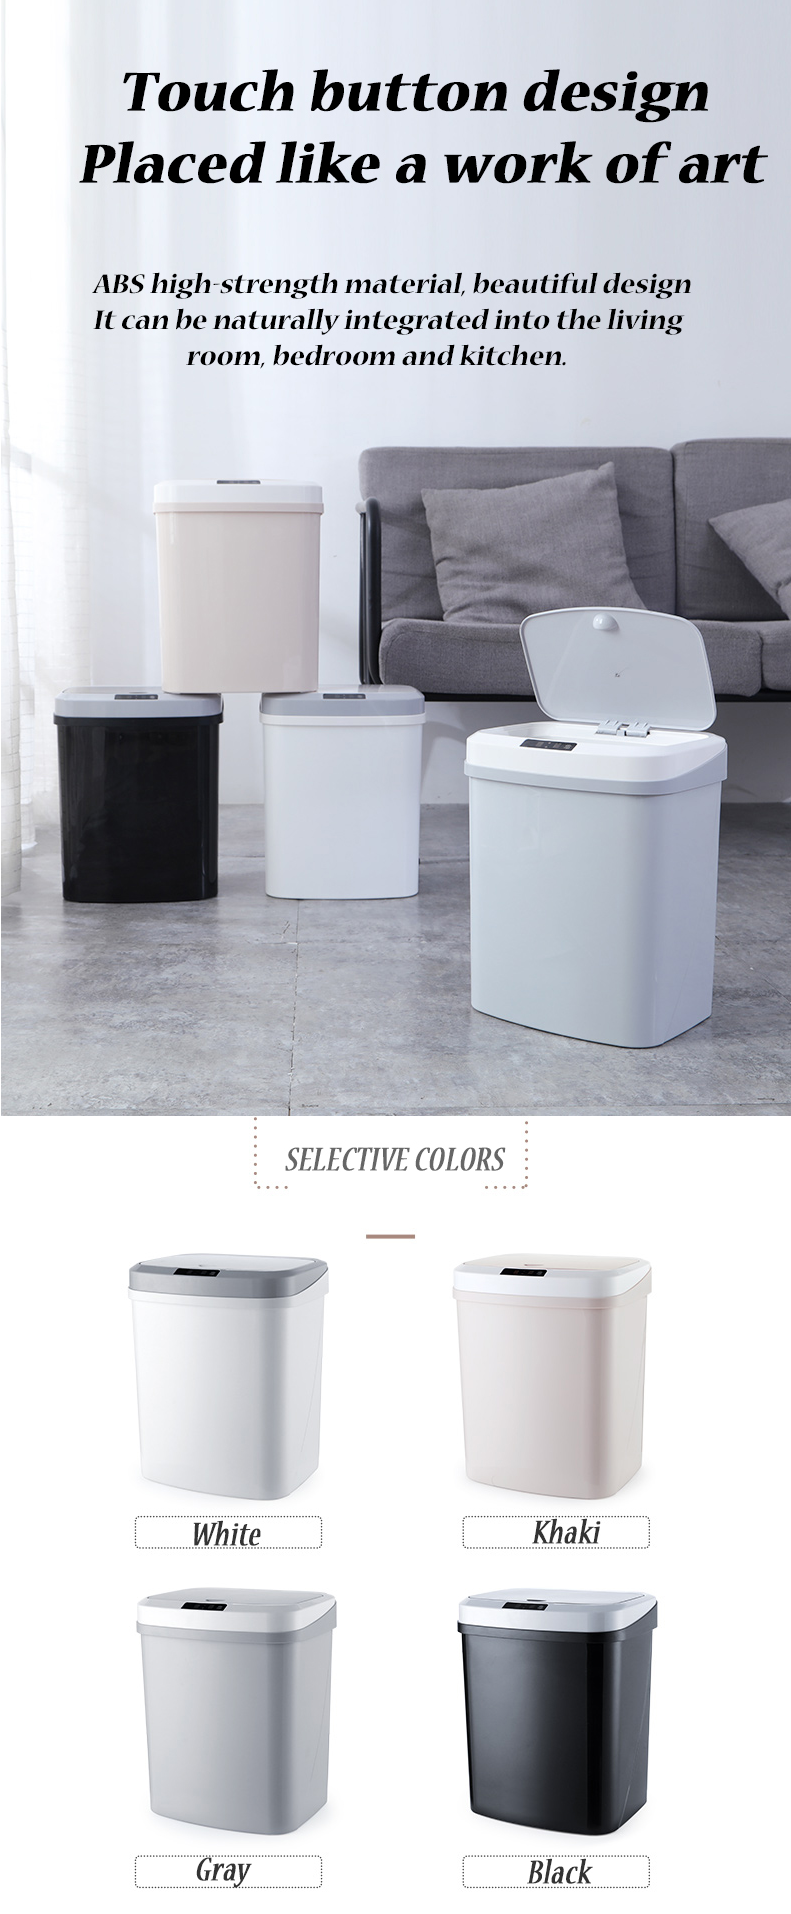 Meixun-PD-6008-14L-Intelligent-Inductive-Trash-Can-Inductive-Open-Waste-Bins-For-Office-Home-Bathroo-1566267-4